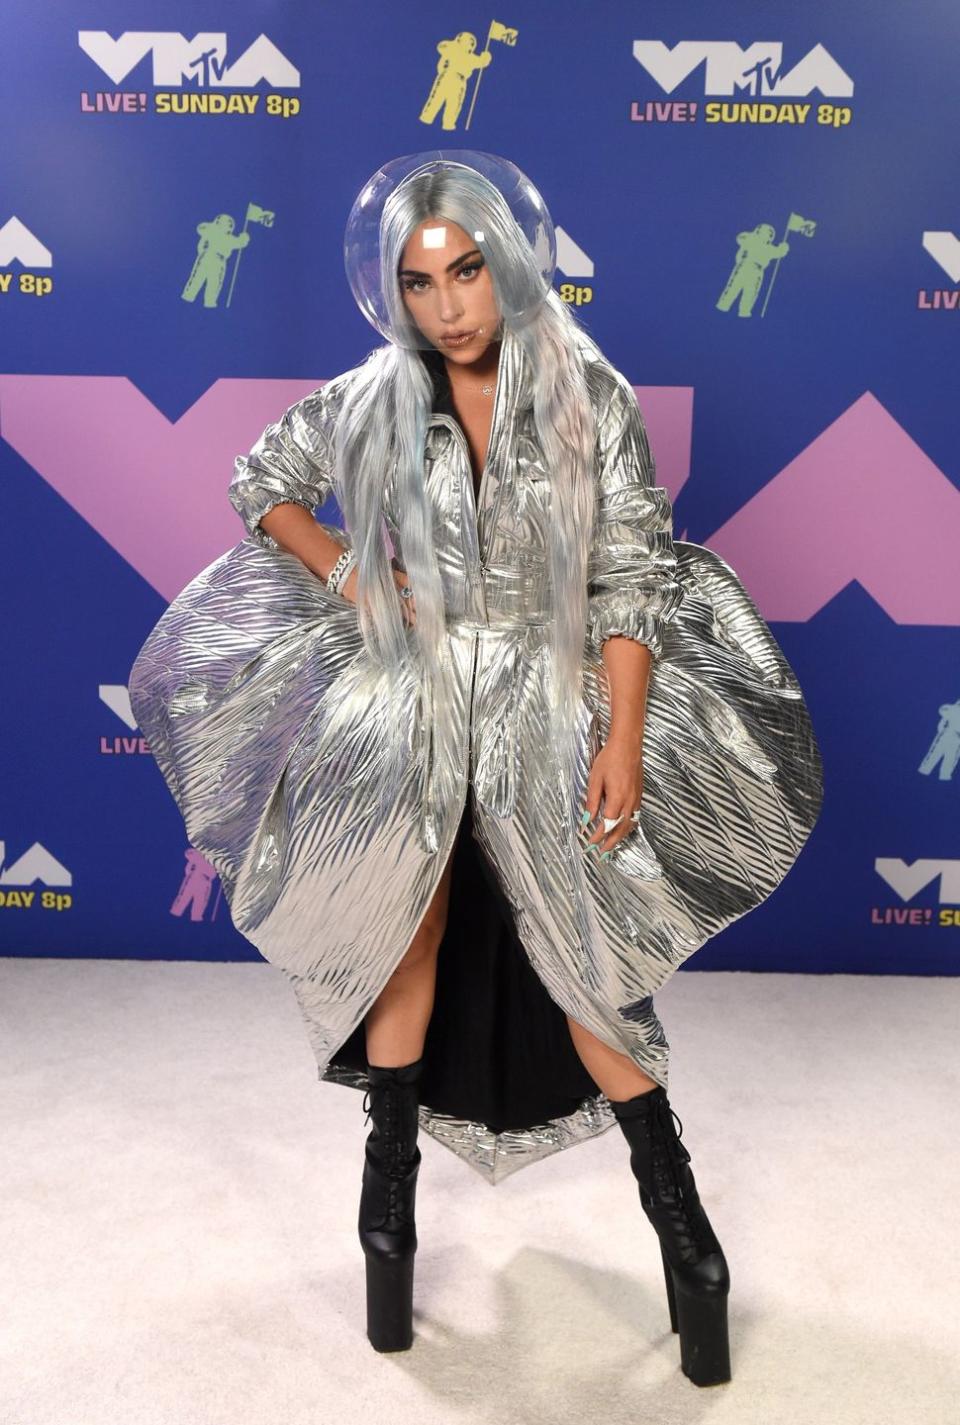 <p>Lady Gaga walked the red carpet in a futuristic silver dress, platform boots and a bubble visor - commenting on Instagram that she was "wearing face shields before it was a thing". </p>